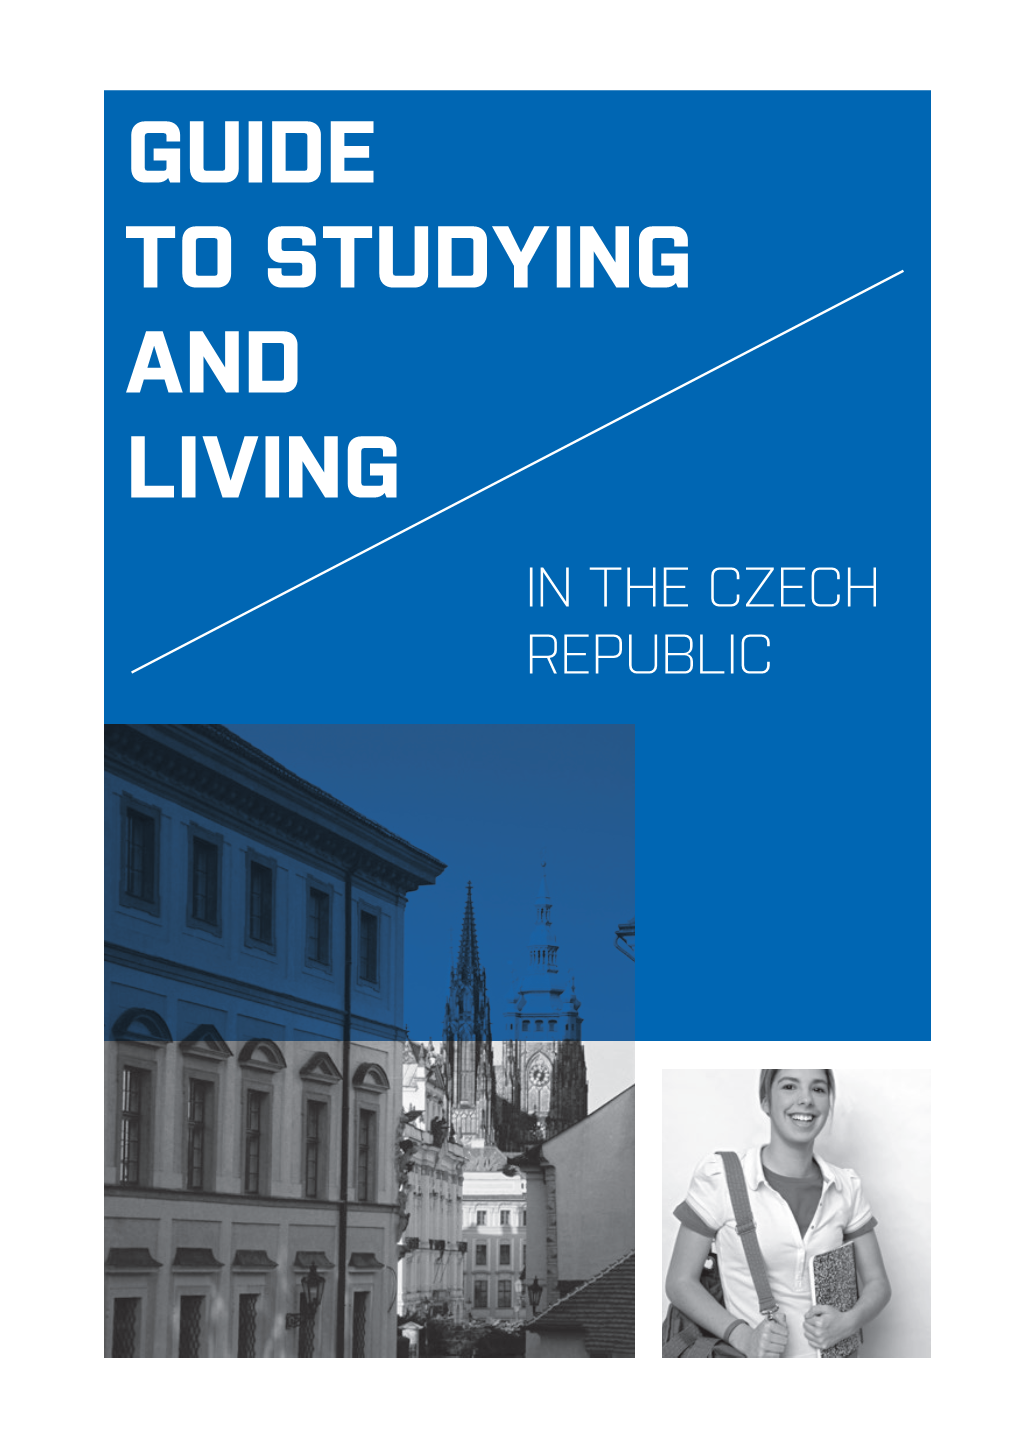 Guide to Studying and Living in the Czech Republic Welcome to the Czech Republic